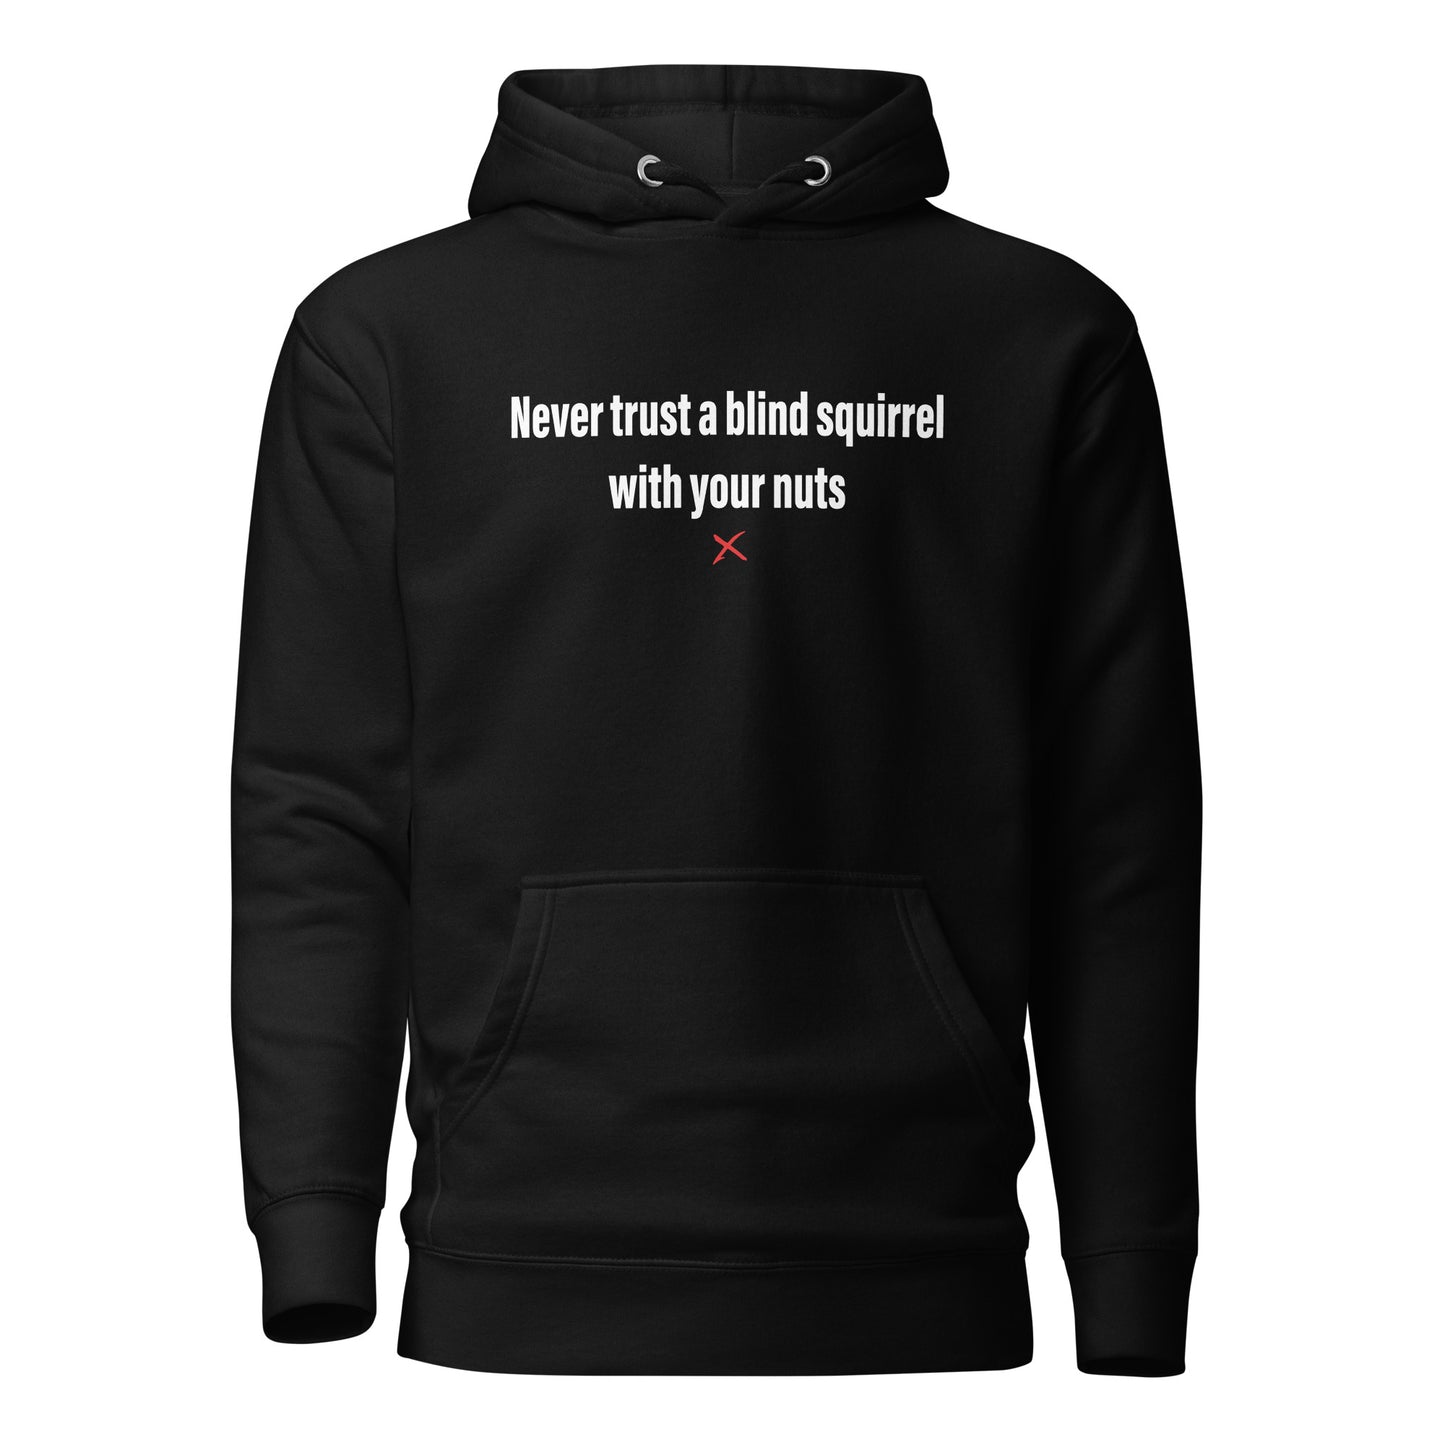 Never trust a blind squirrel with your nuts - Hoodie